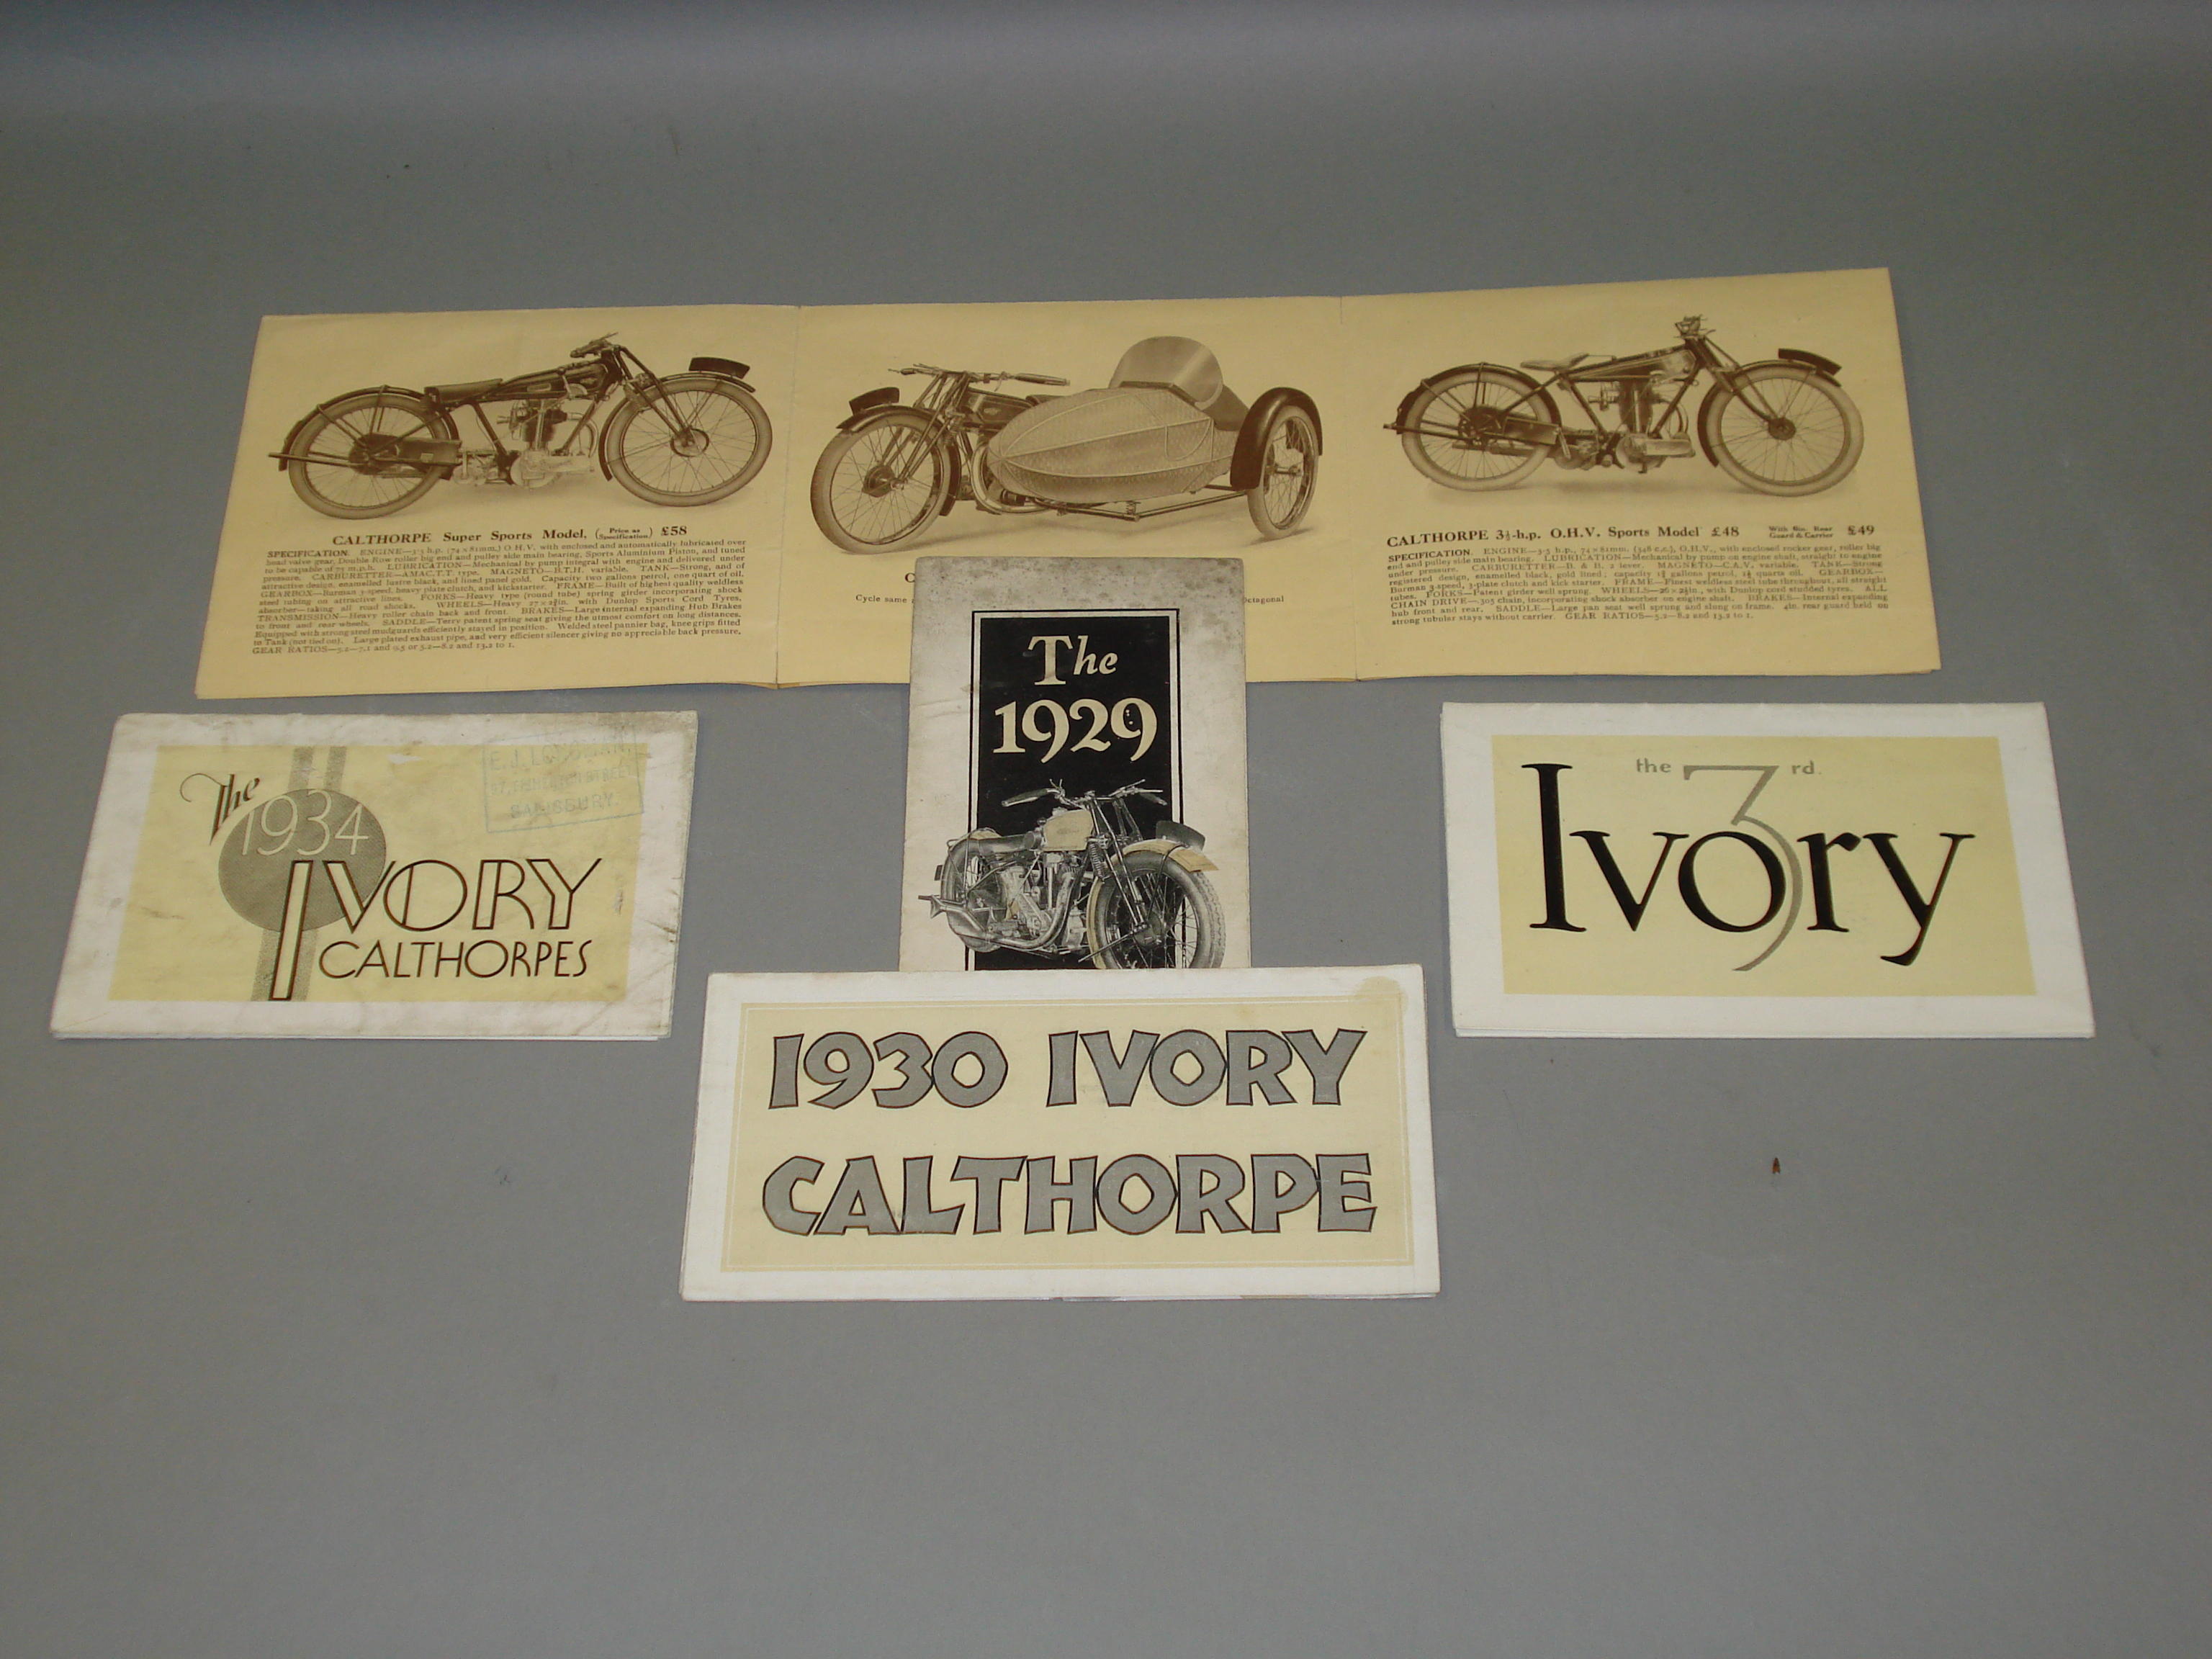 Calthorpe sales brochures from the 1920s and '30s,